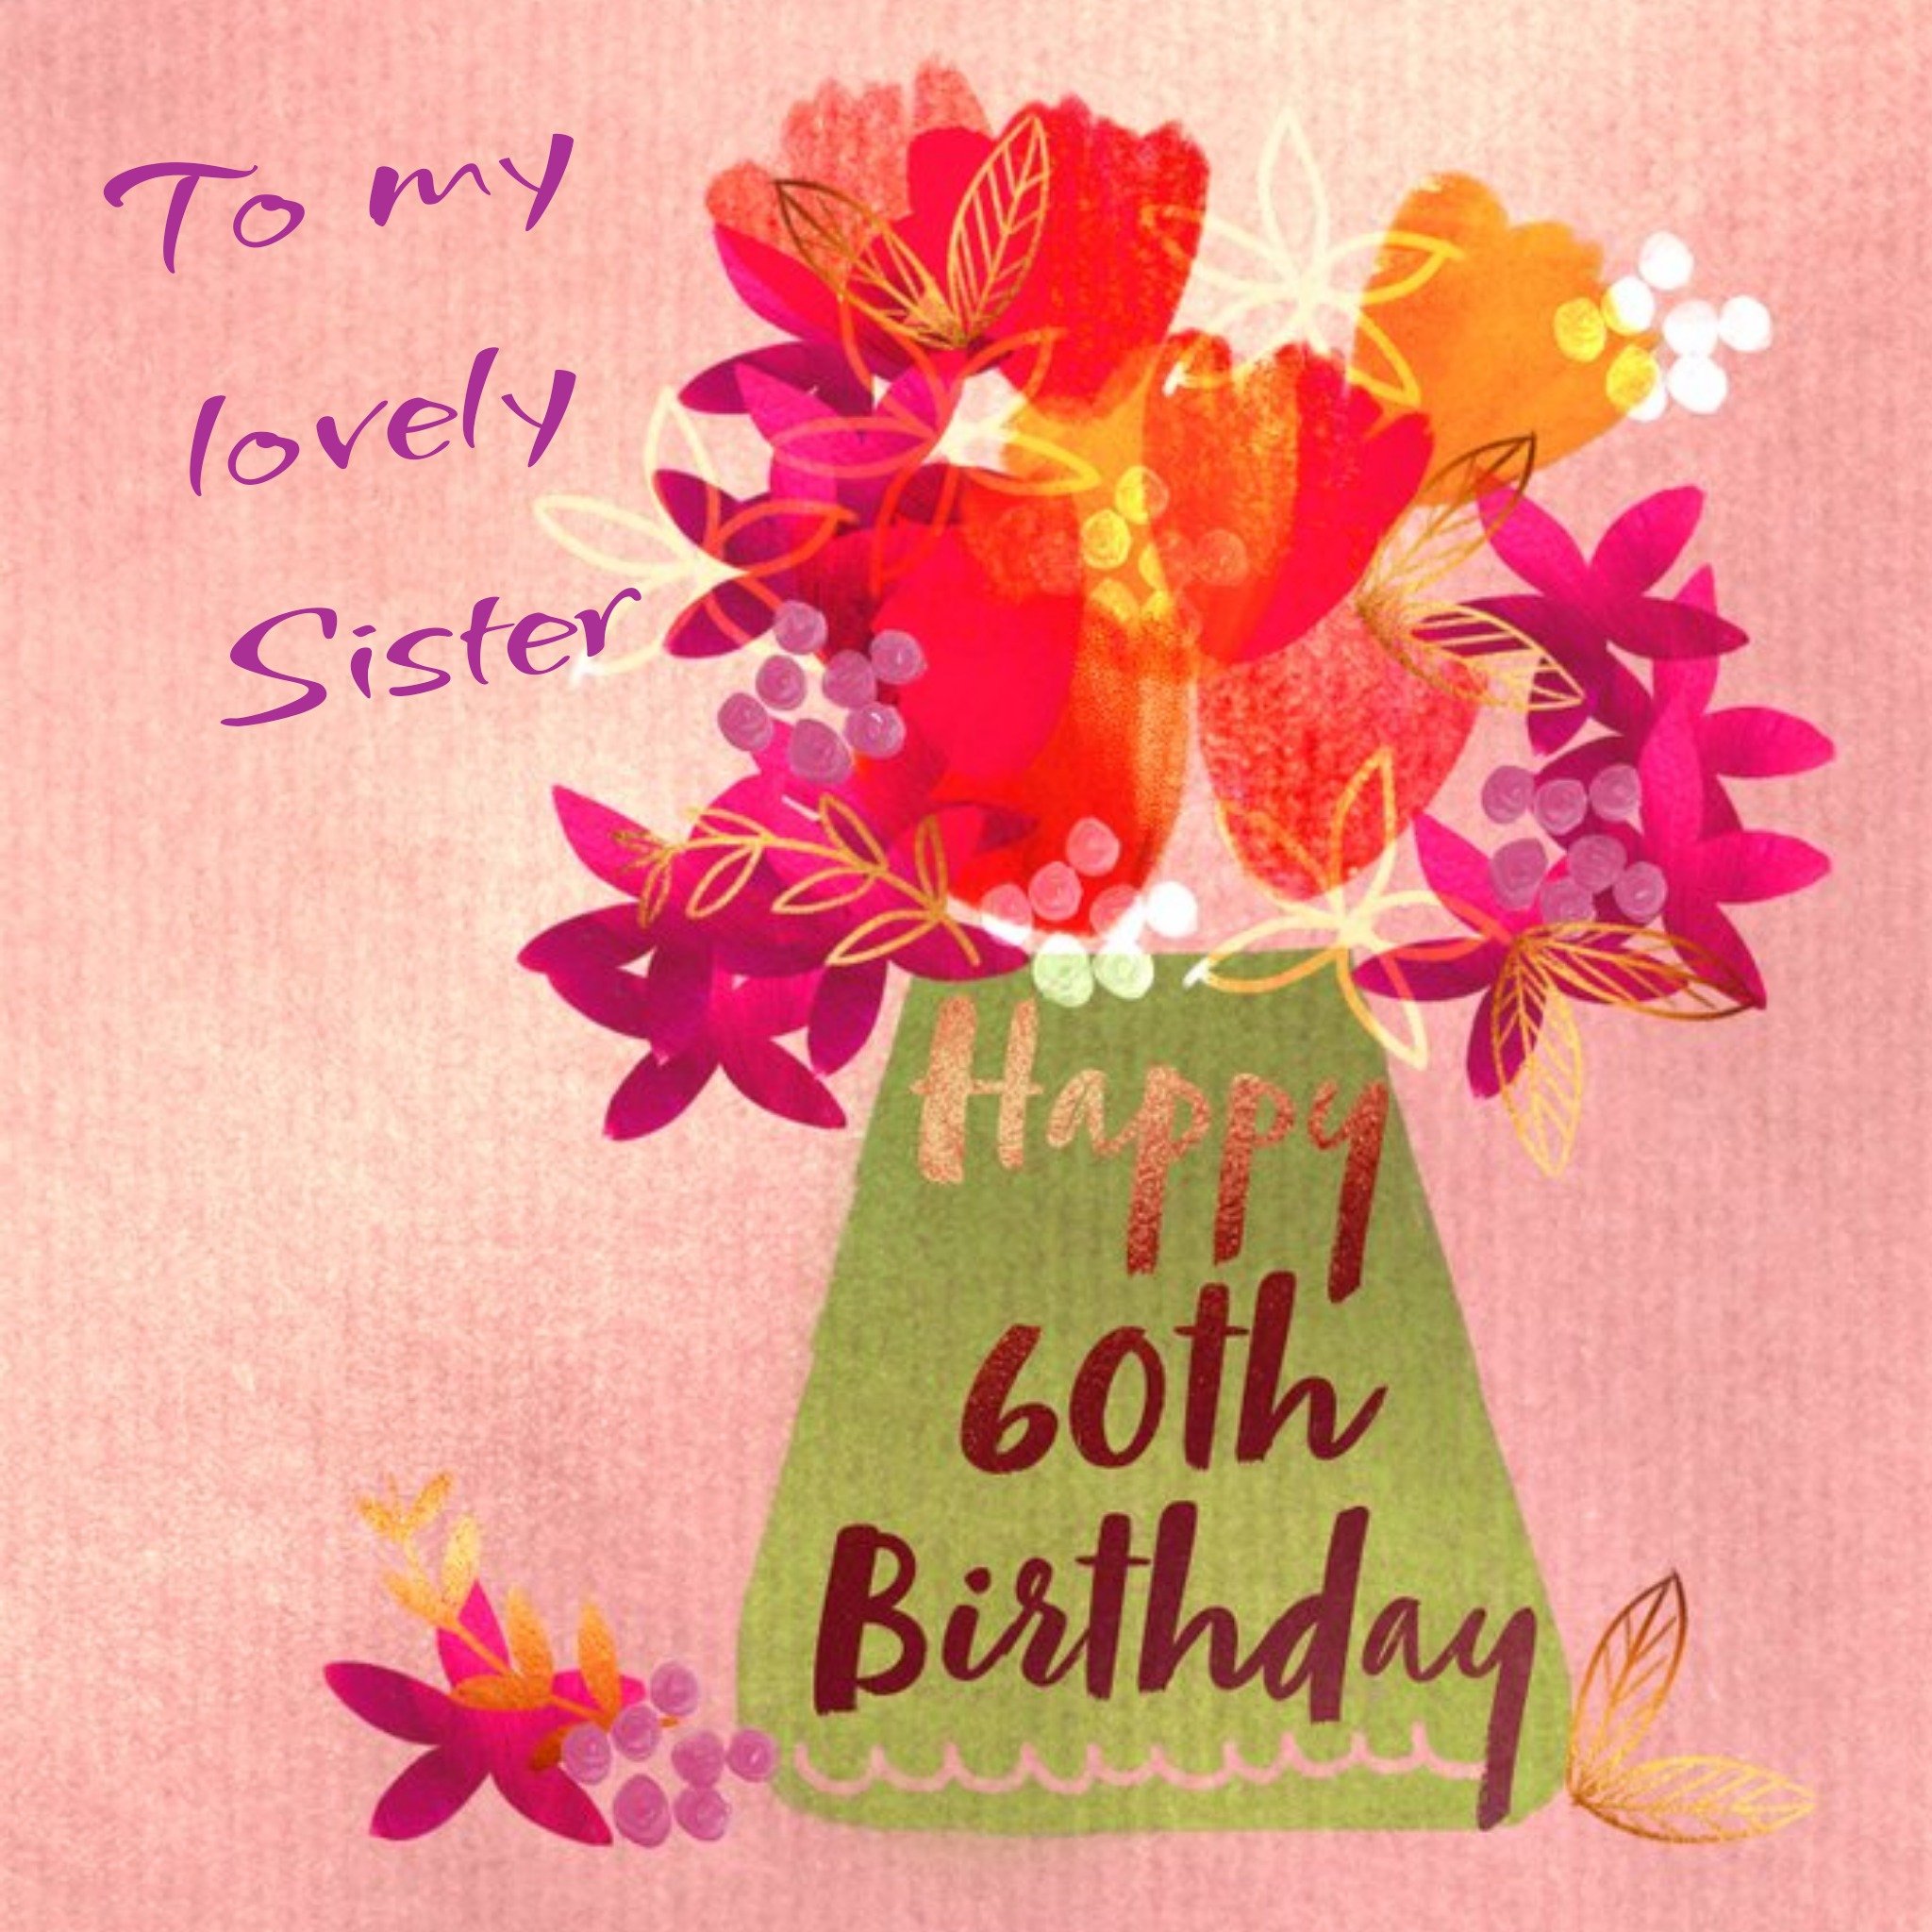 Moonpig Flowers To My Lovely Sister Happy 60th Birthday Card, Large